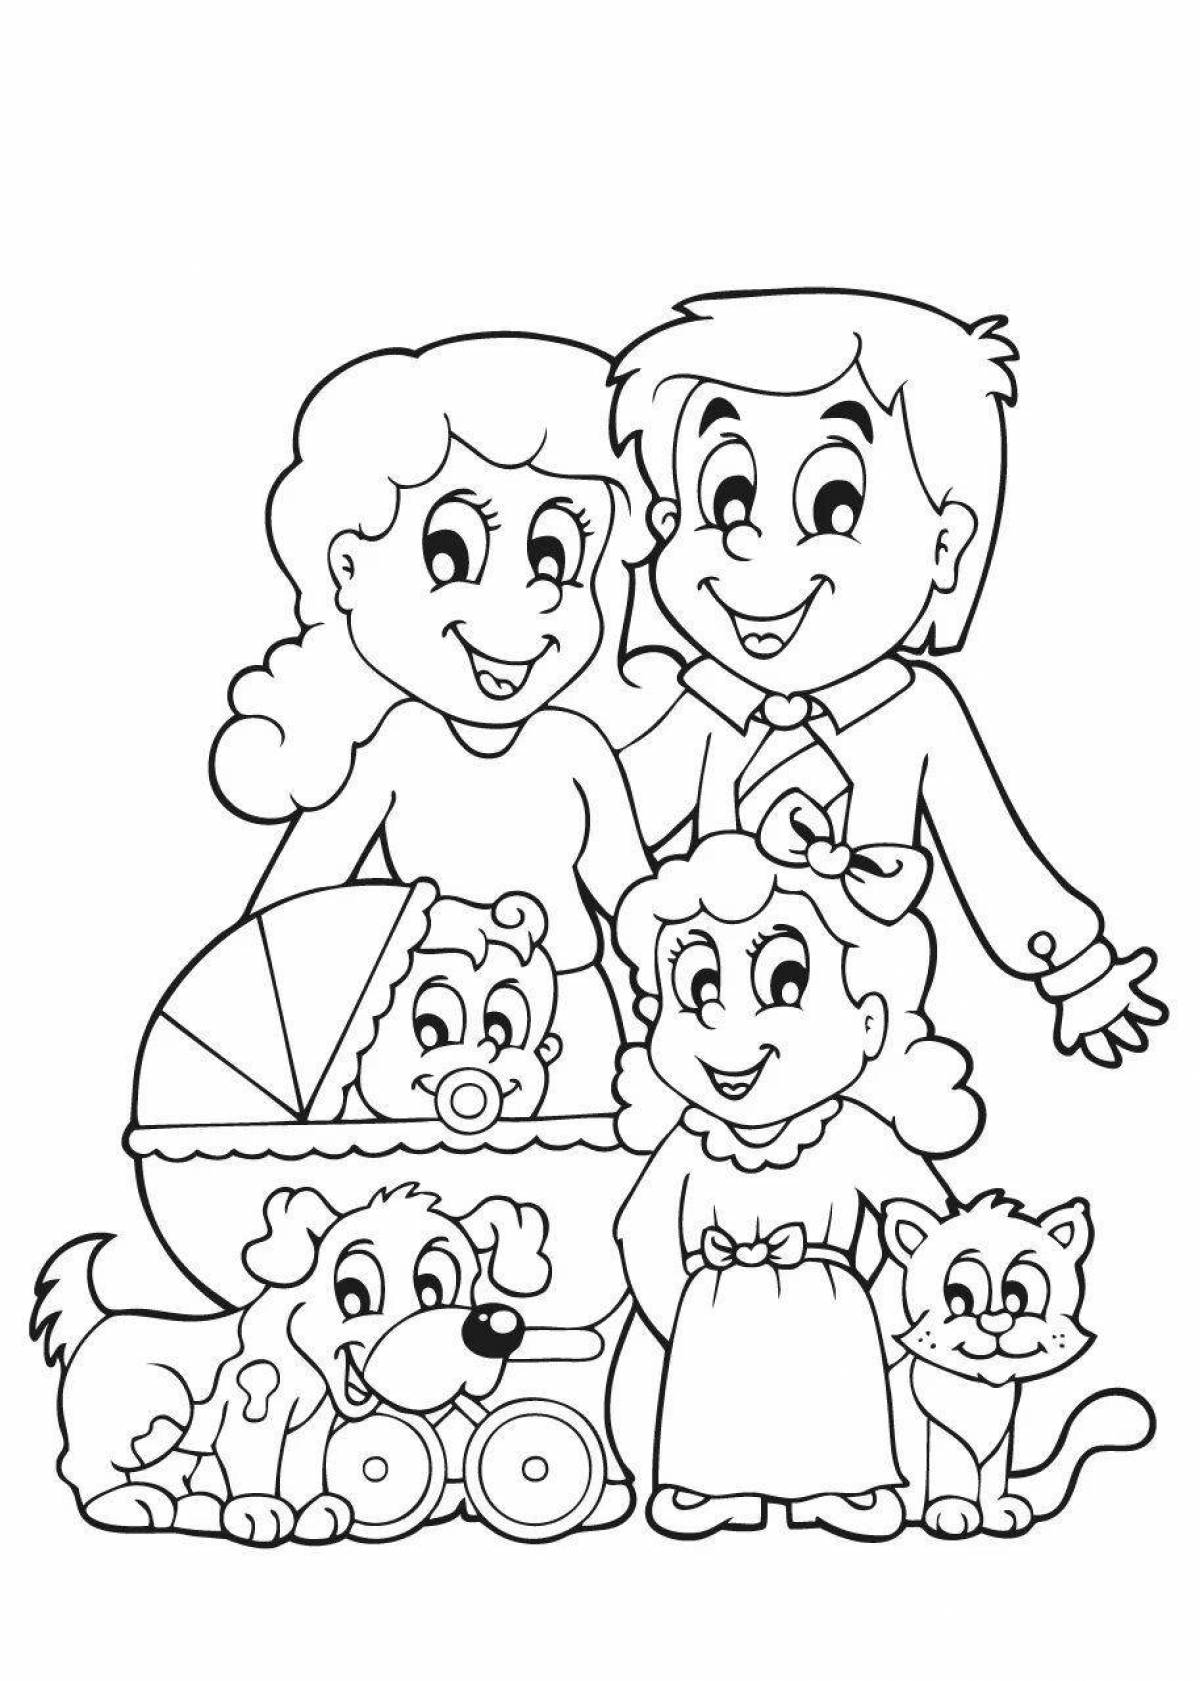 Delightful family coloring book